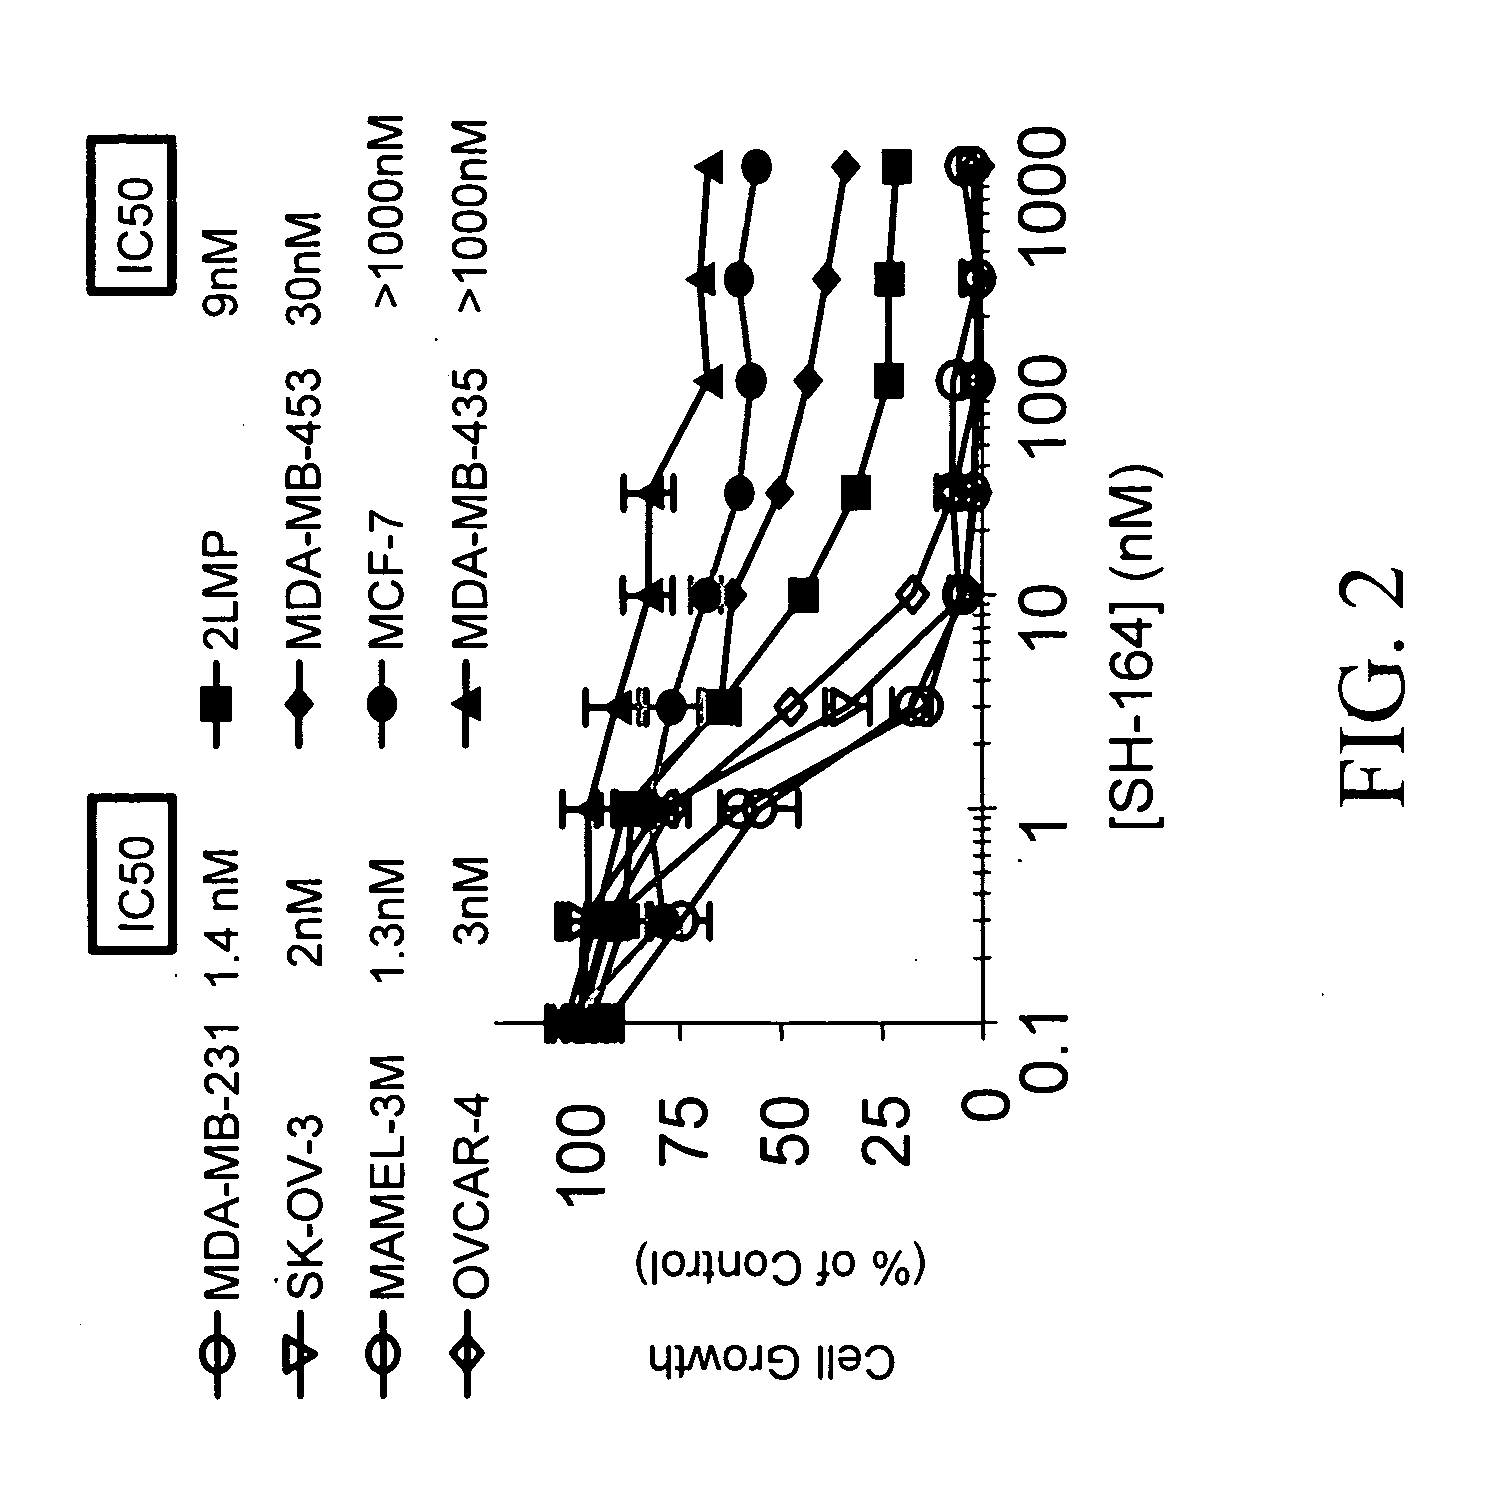 Bivalent smac mimetics and the uses thereof